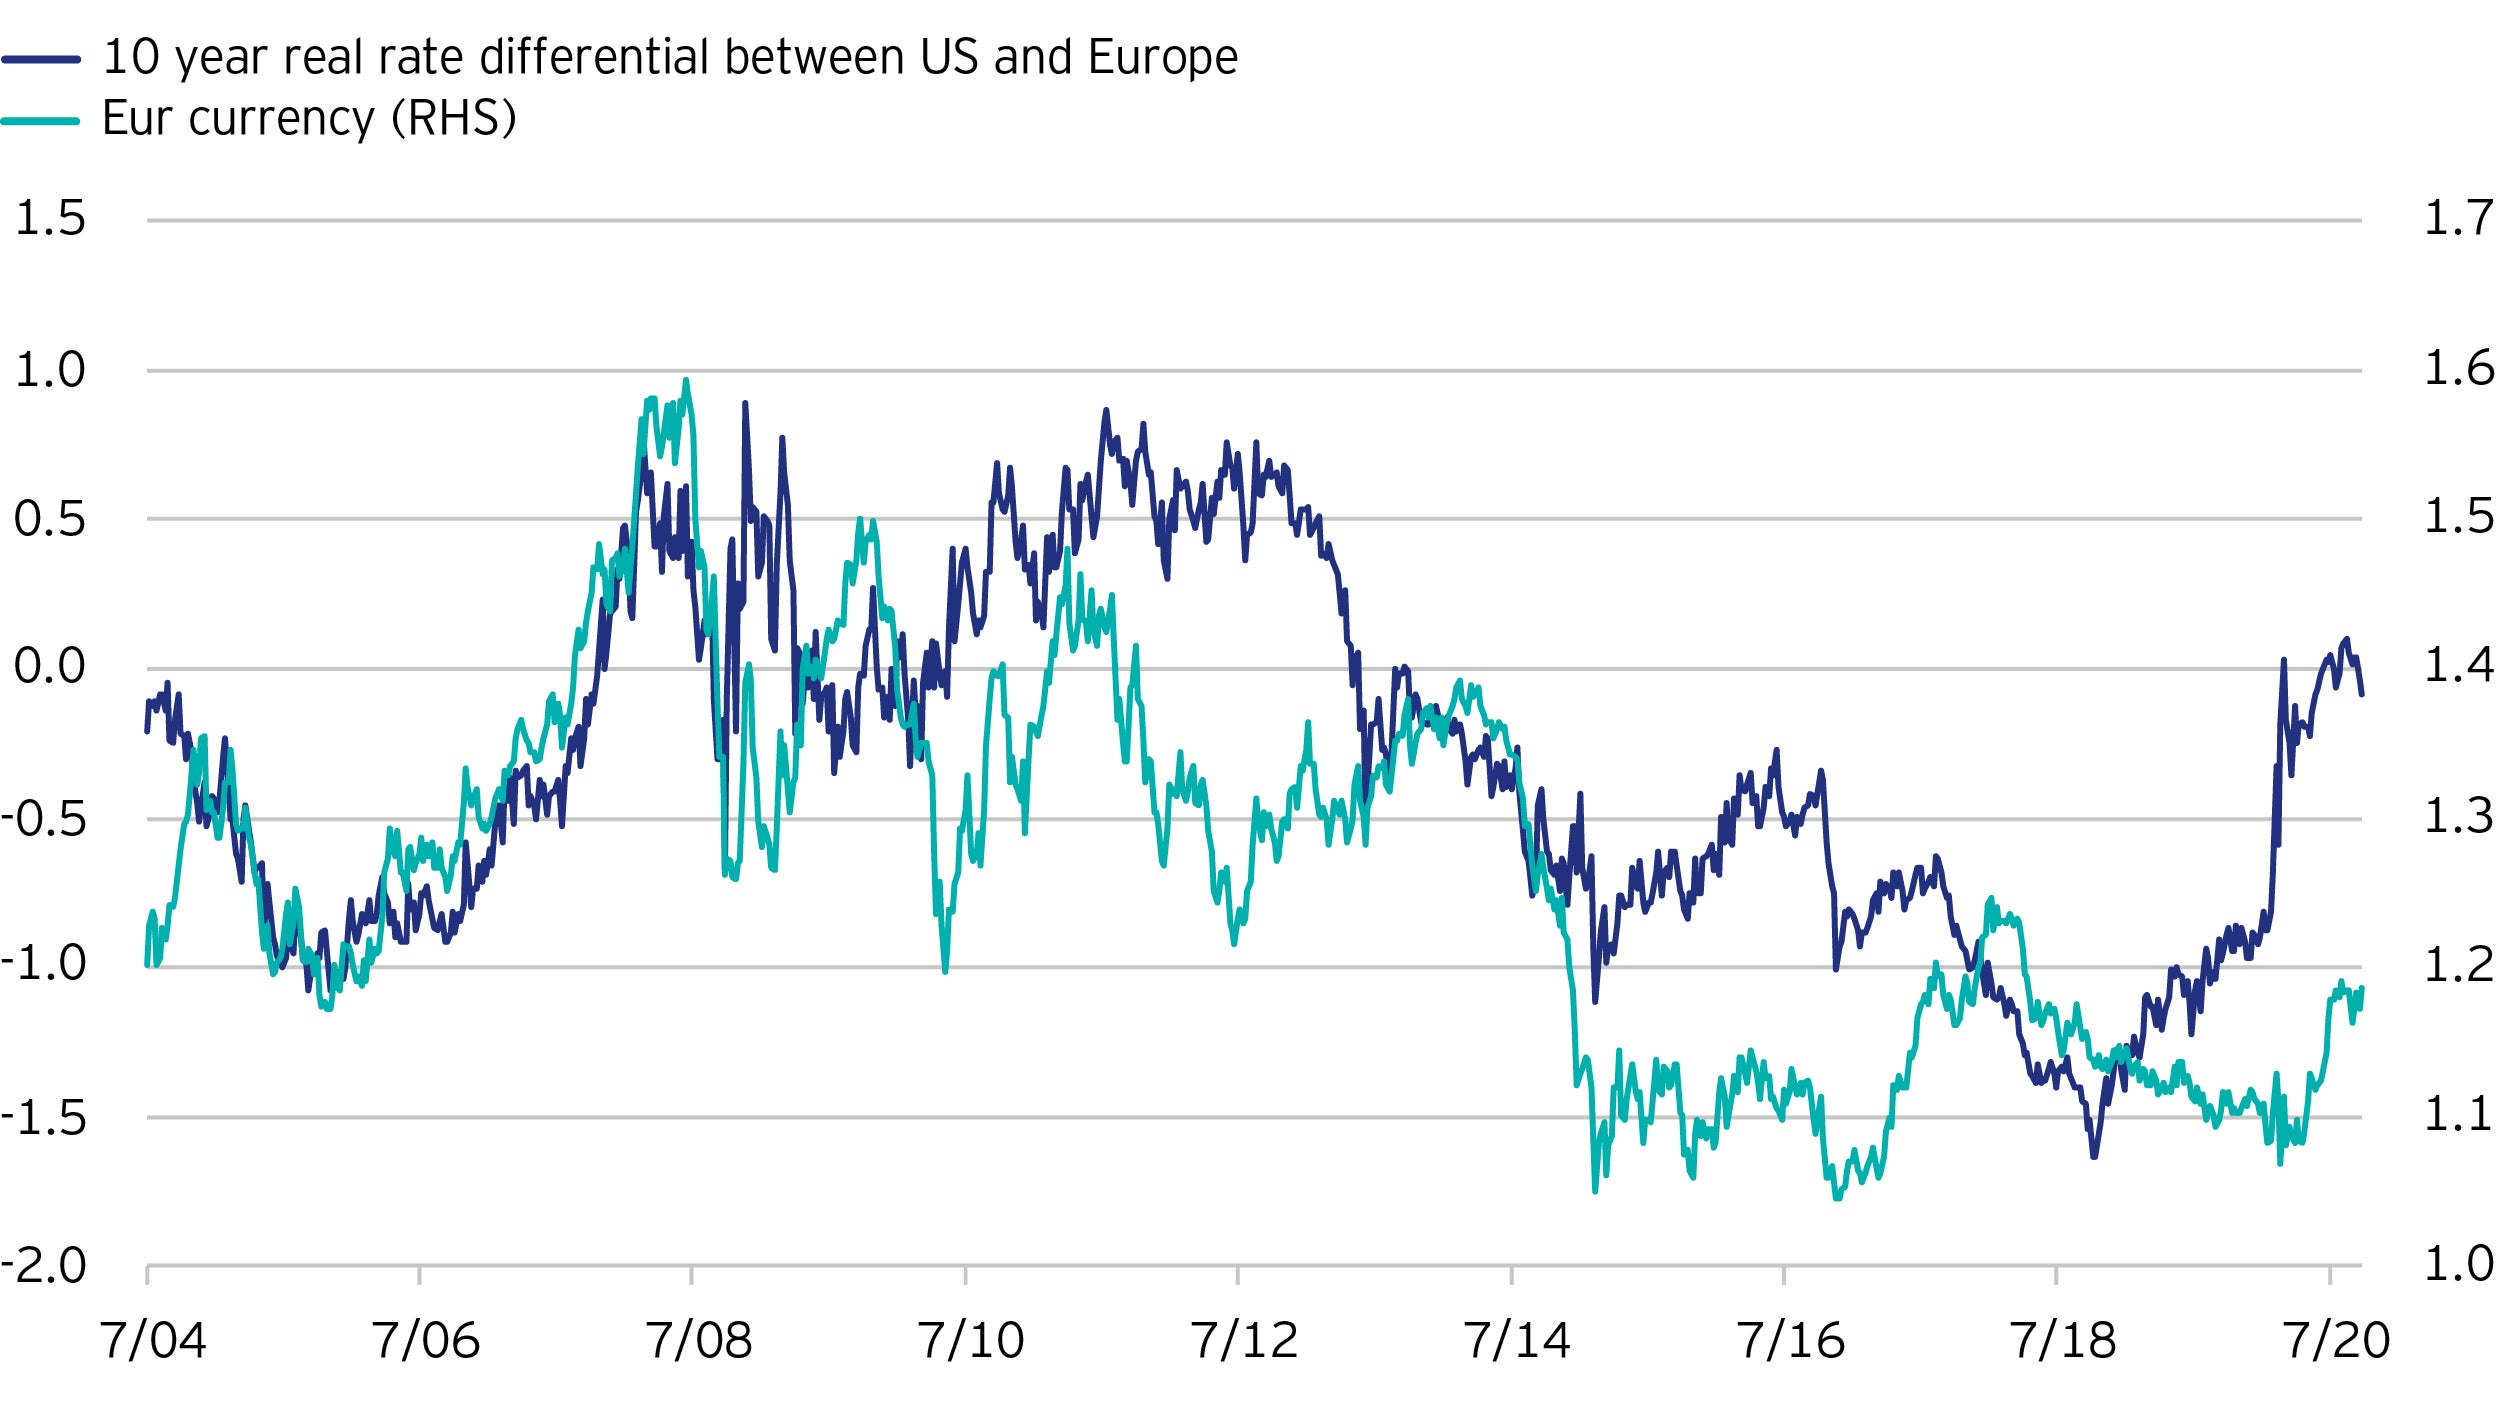 Figure 1.  10 year real rate differential between US and Europe